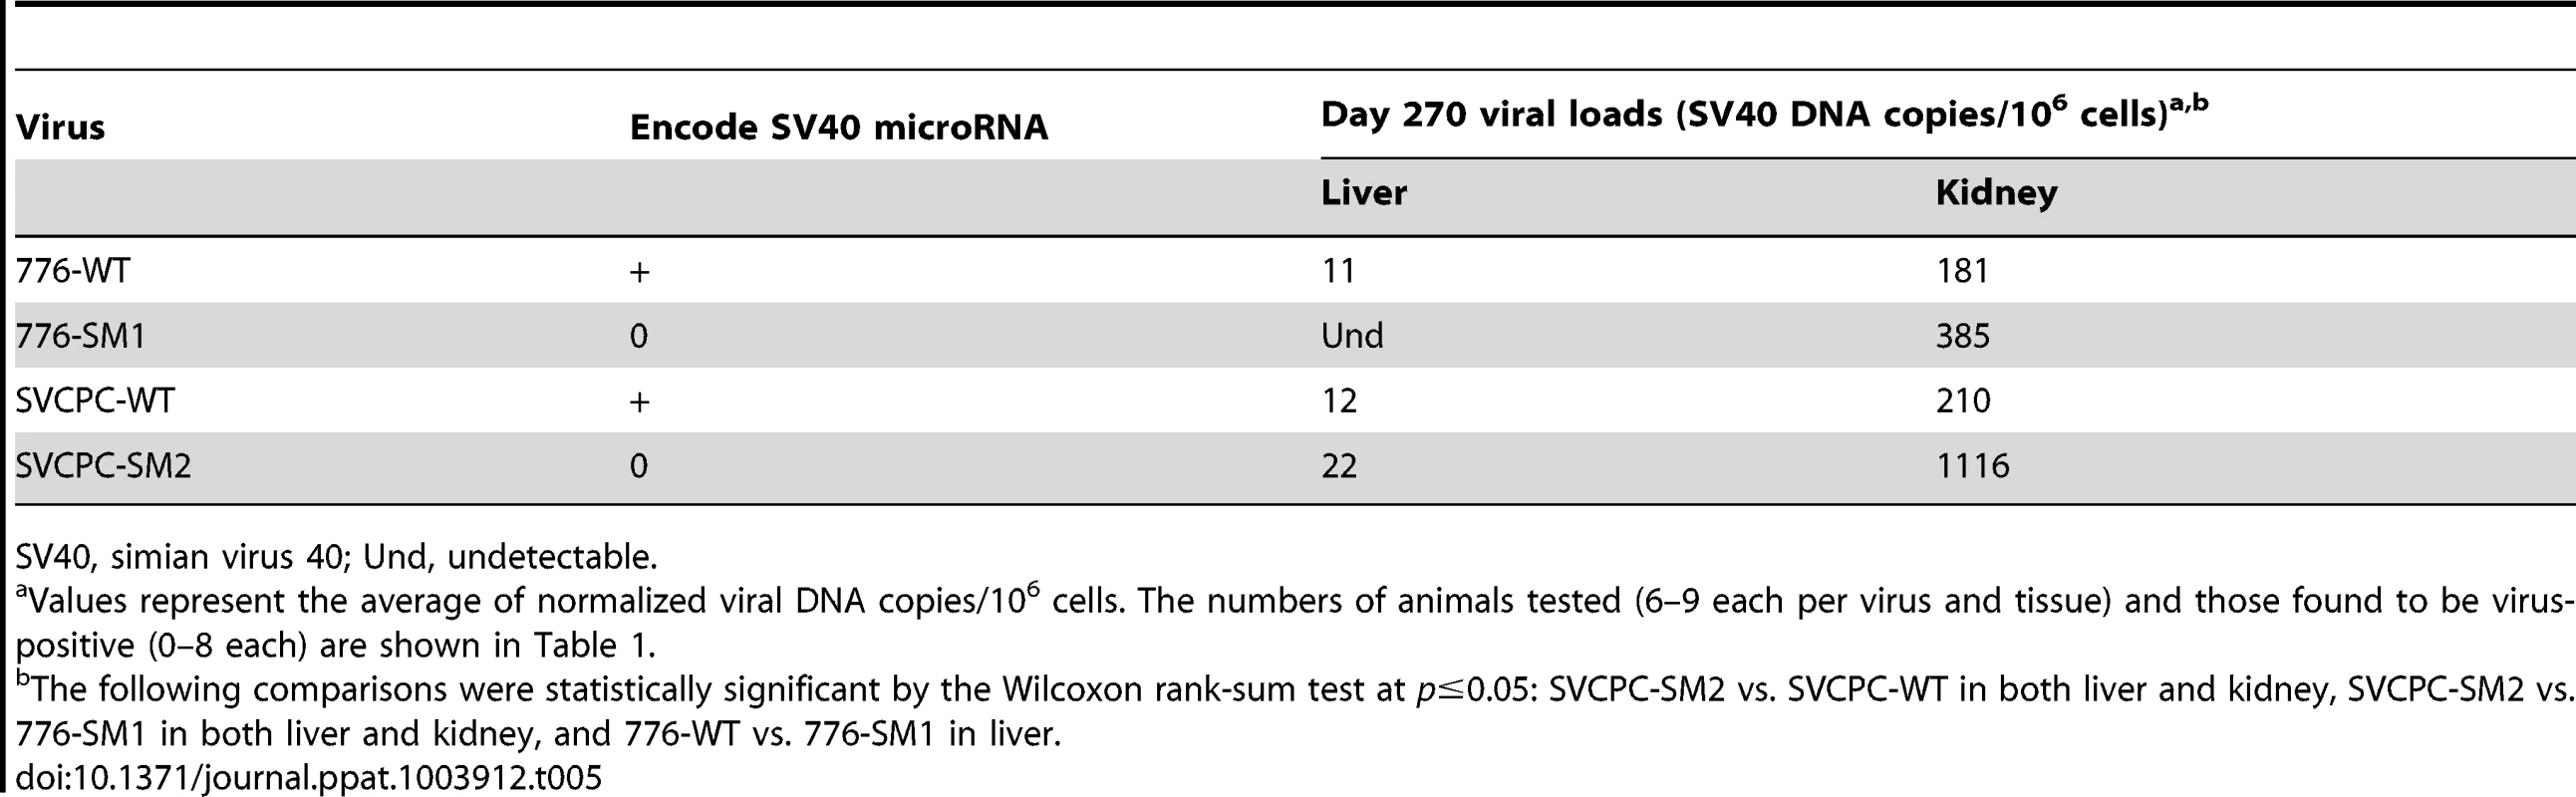 Persistent infections at day 270 in hamster liver and kidney by SV40 wild-type strains and microRNA mutants.